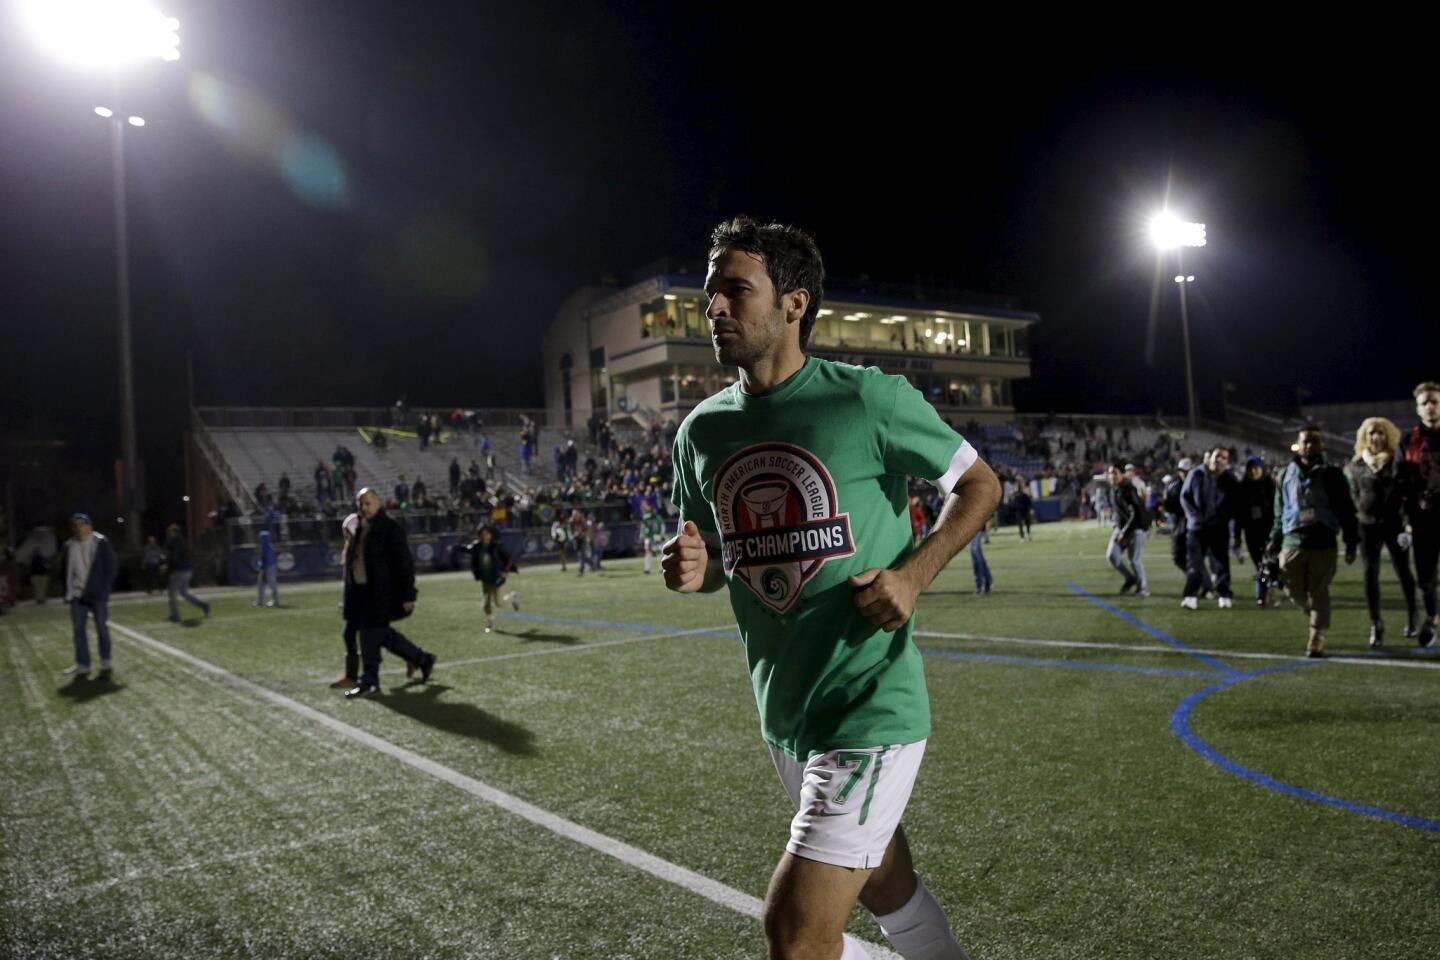 New York Cosmos' Raul runs off the field following his team's win over the Ottawa Fury in the NASL Championship Finals in Hempstead